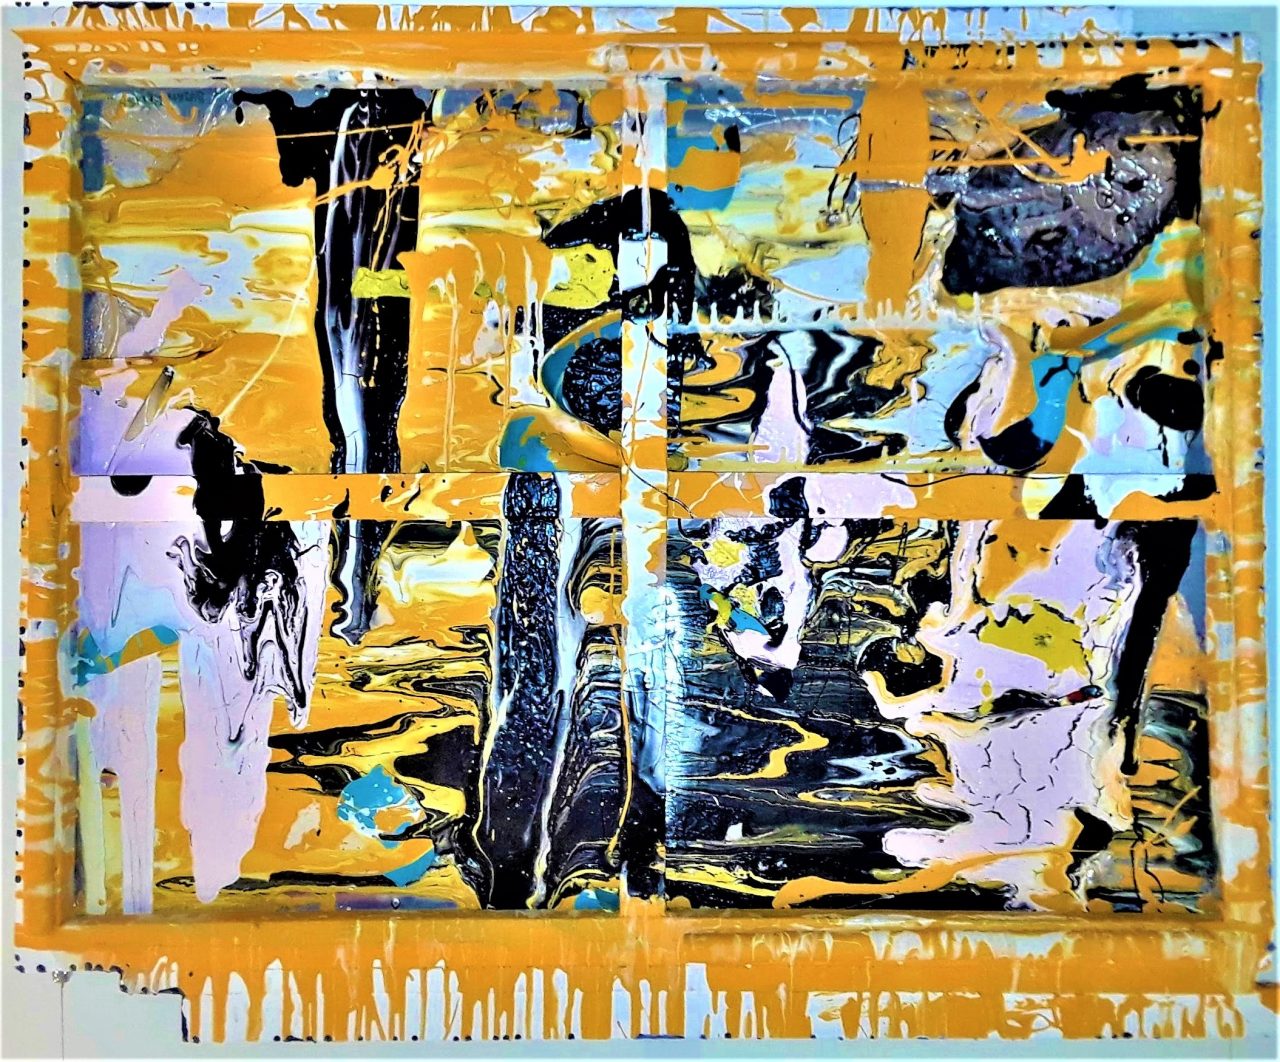 WISECRACKS. The brightest painting ever created. It's liquid shiny colors rival molten glass for excitement and drama. This multi surface canvas is the perfect size, color, and originality to become a focal point in any maxi mansion or tiny home. Paint on canvas . Framed and signed. 42 x inches. For sale $200.00